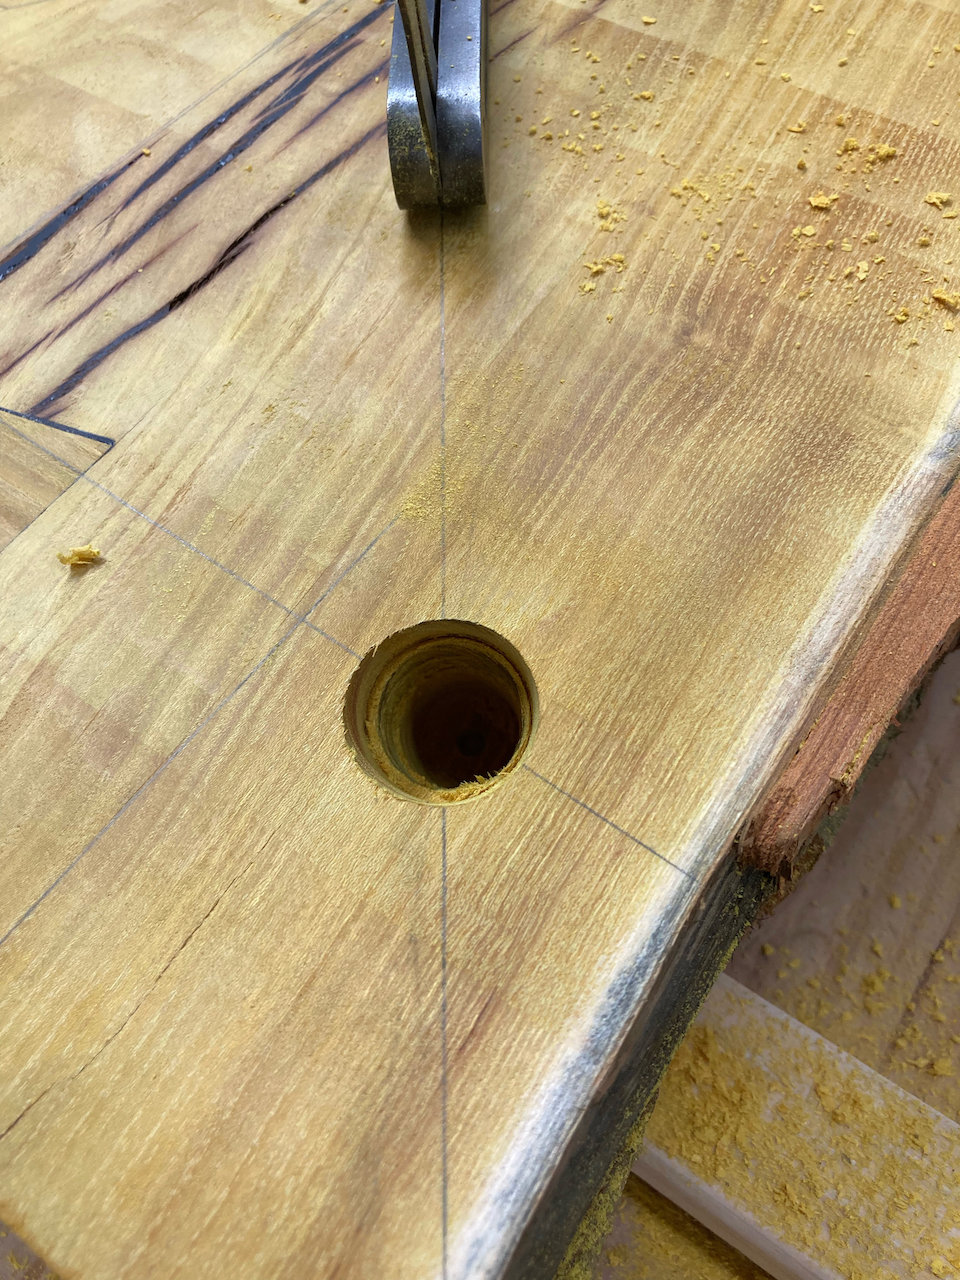 Partially drilled hole